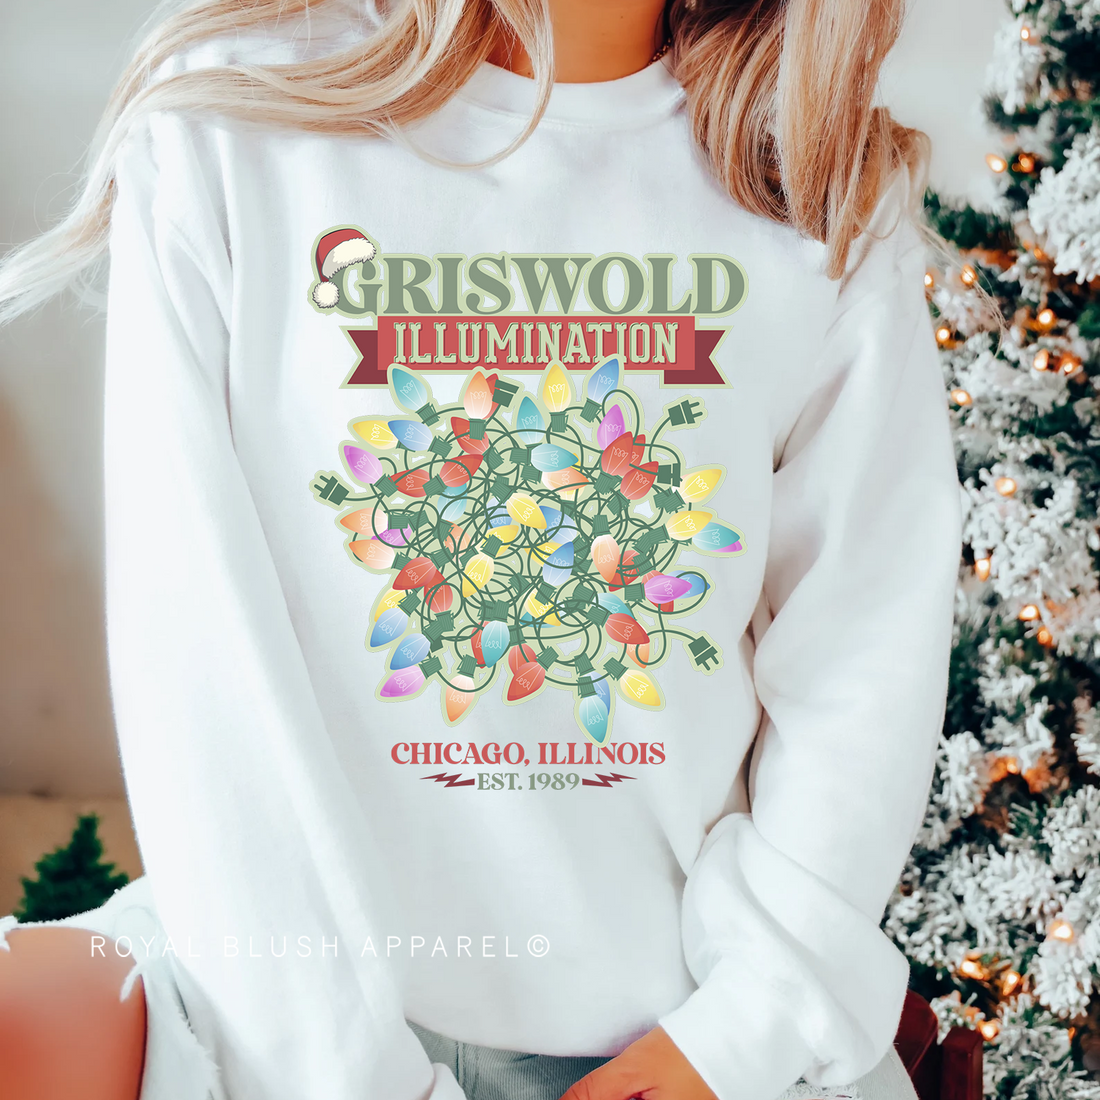 Griswold Illumination Full Colour Transfer